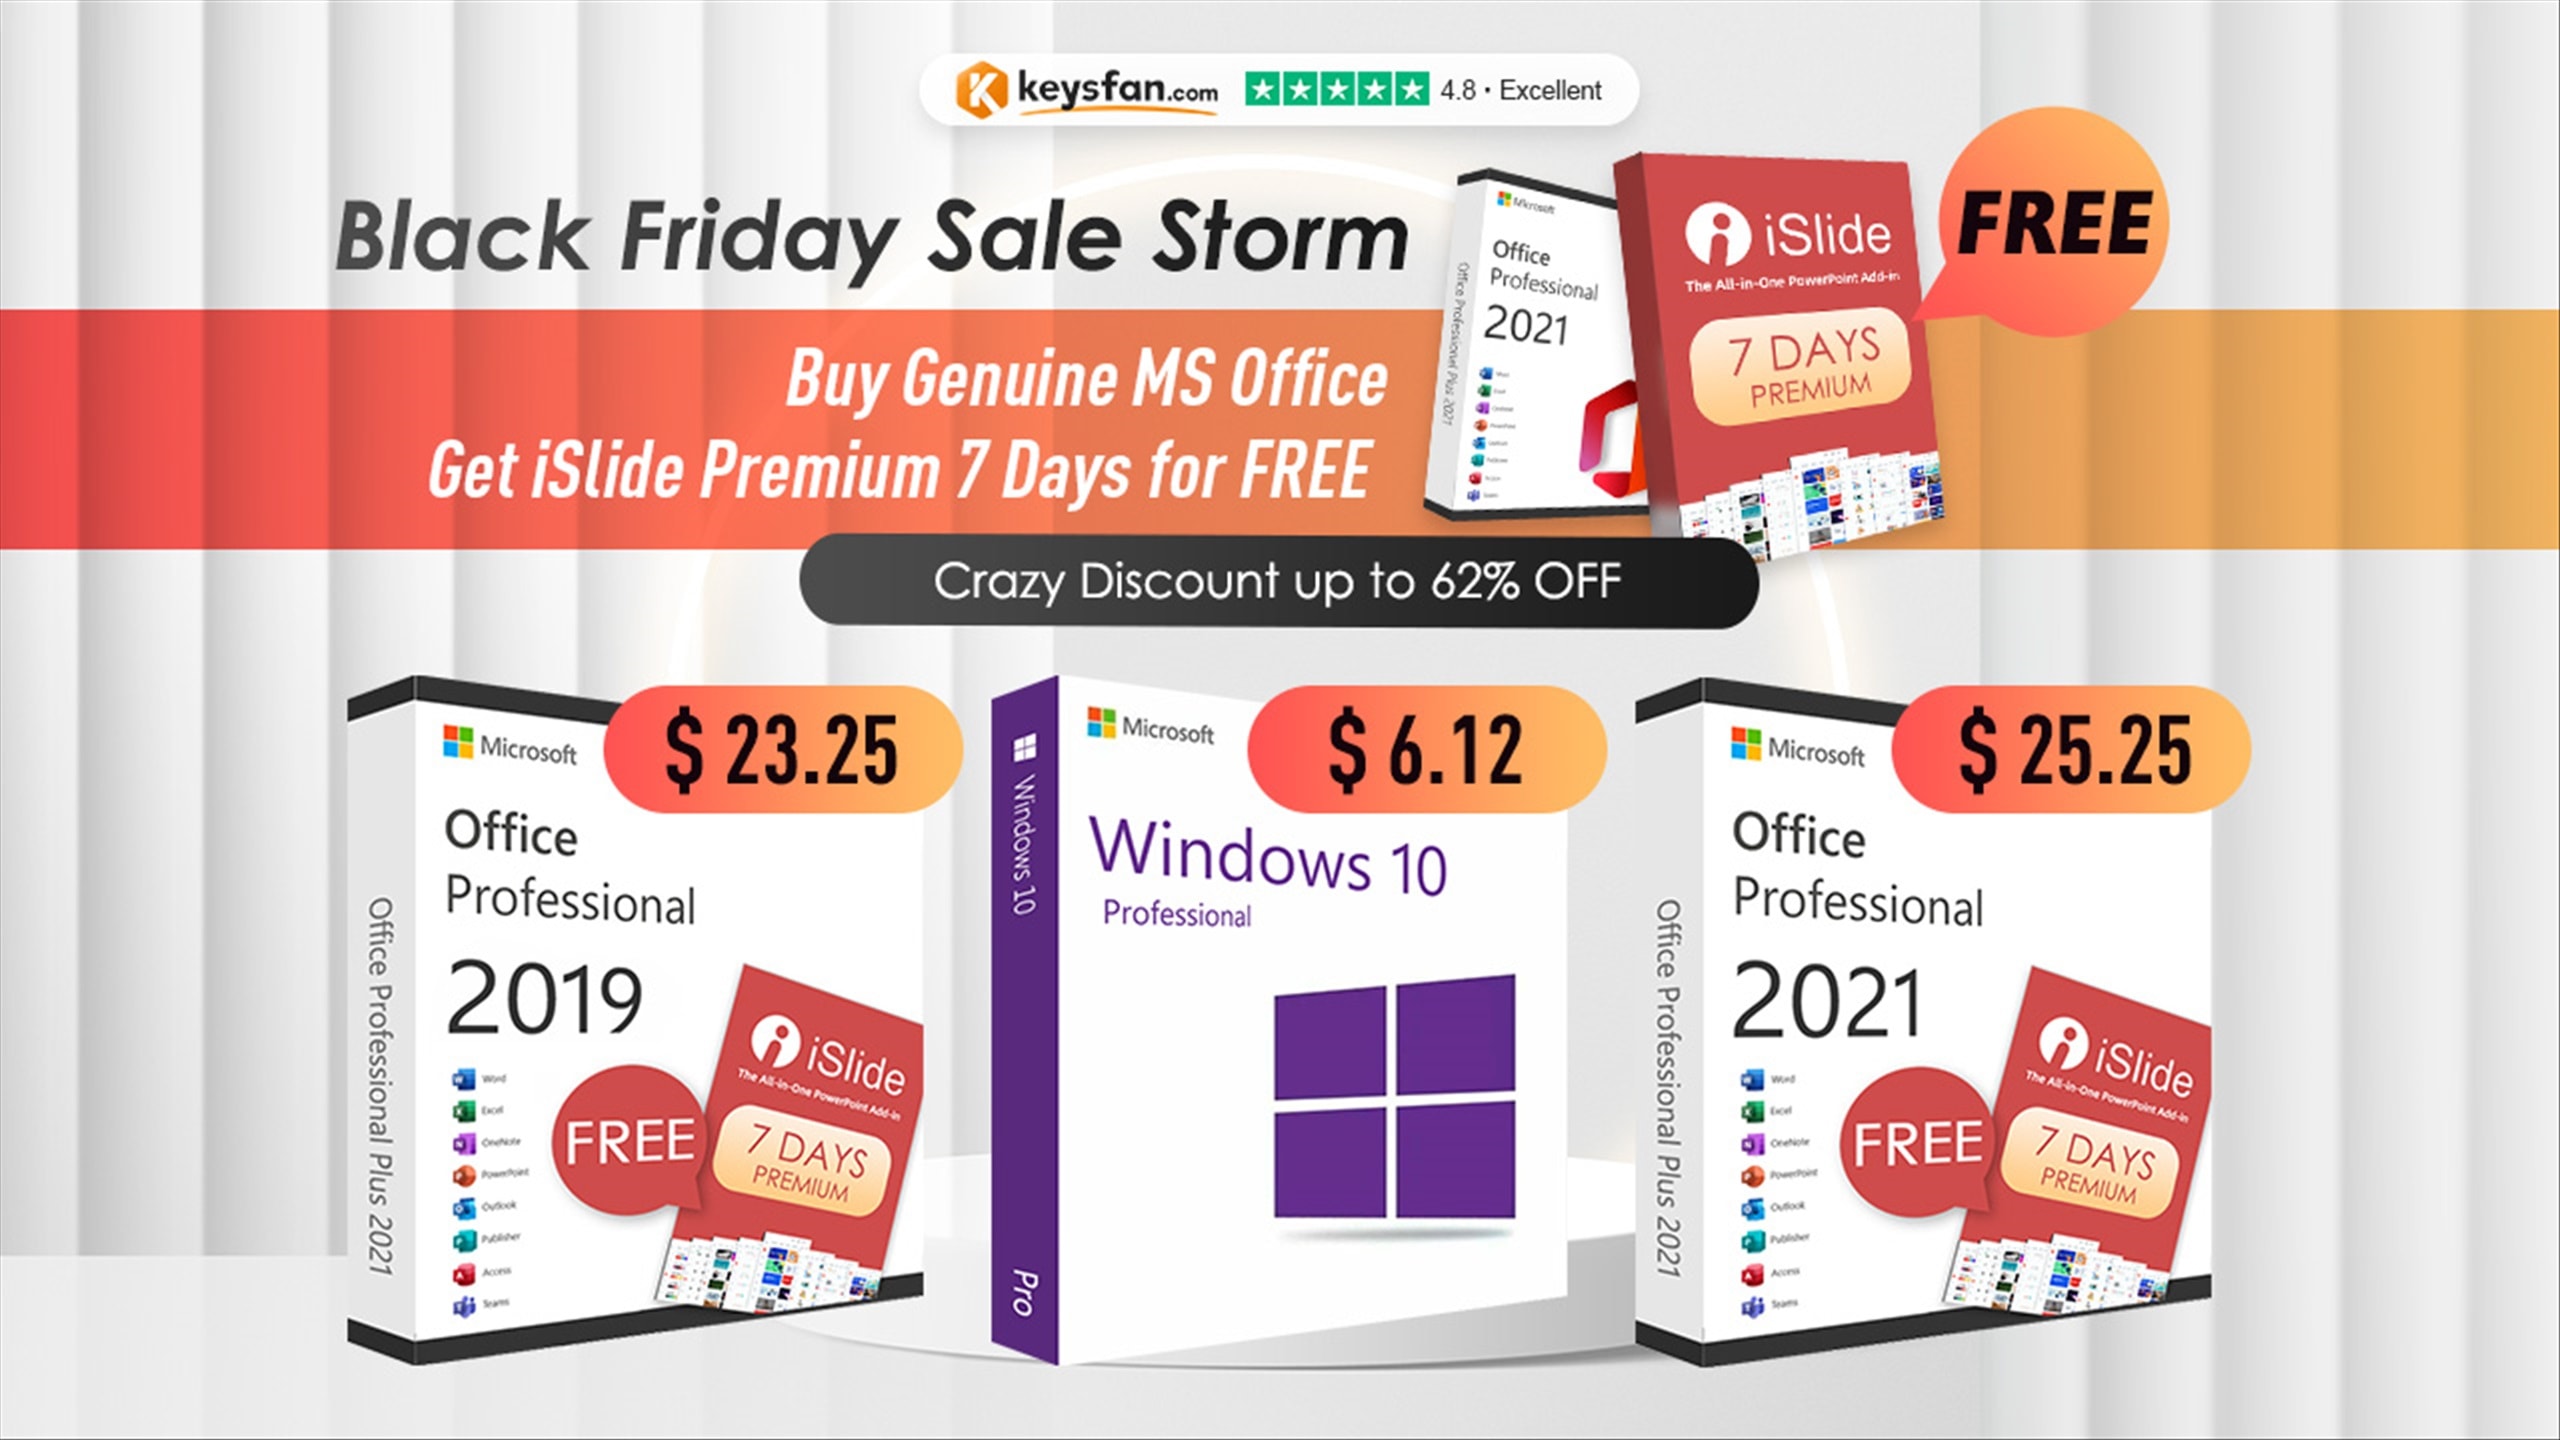 Keysfan Black Friday Sale 2022, best price of the year! Limited time to get Office 2021 for only $25.25 and get iSlide Premium 7 Days for FREE!